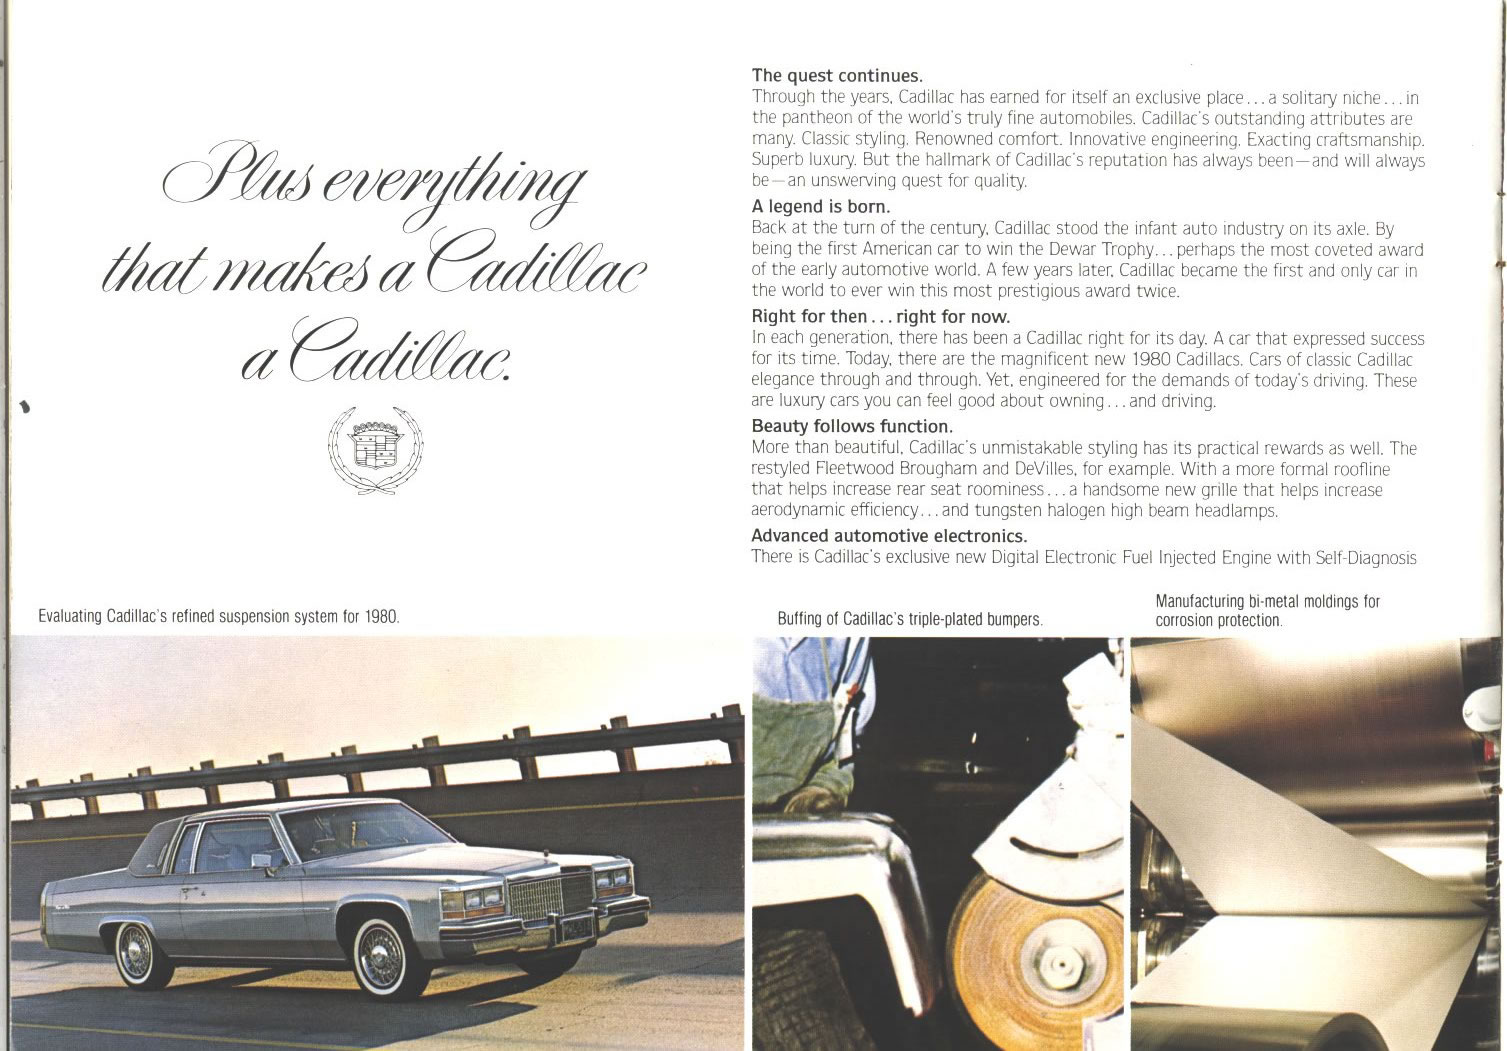 1980 Cadillac Preview-14